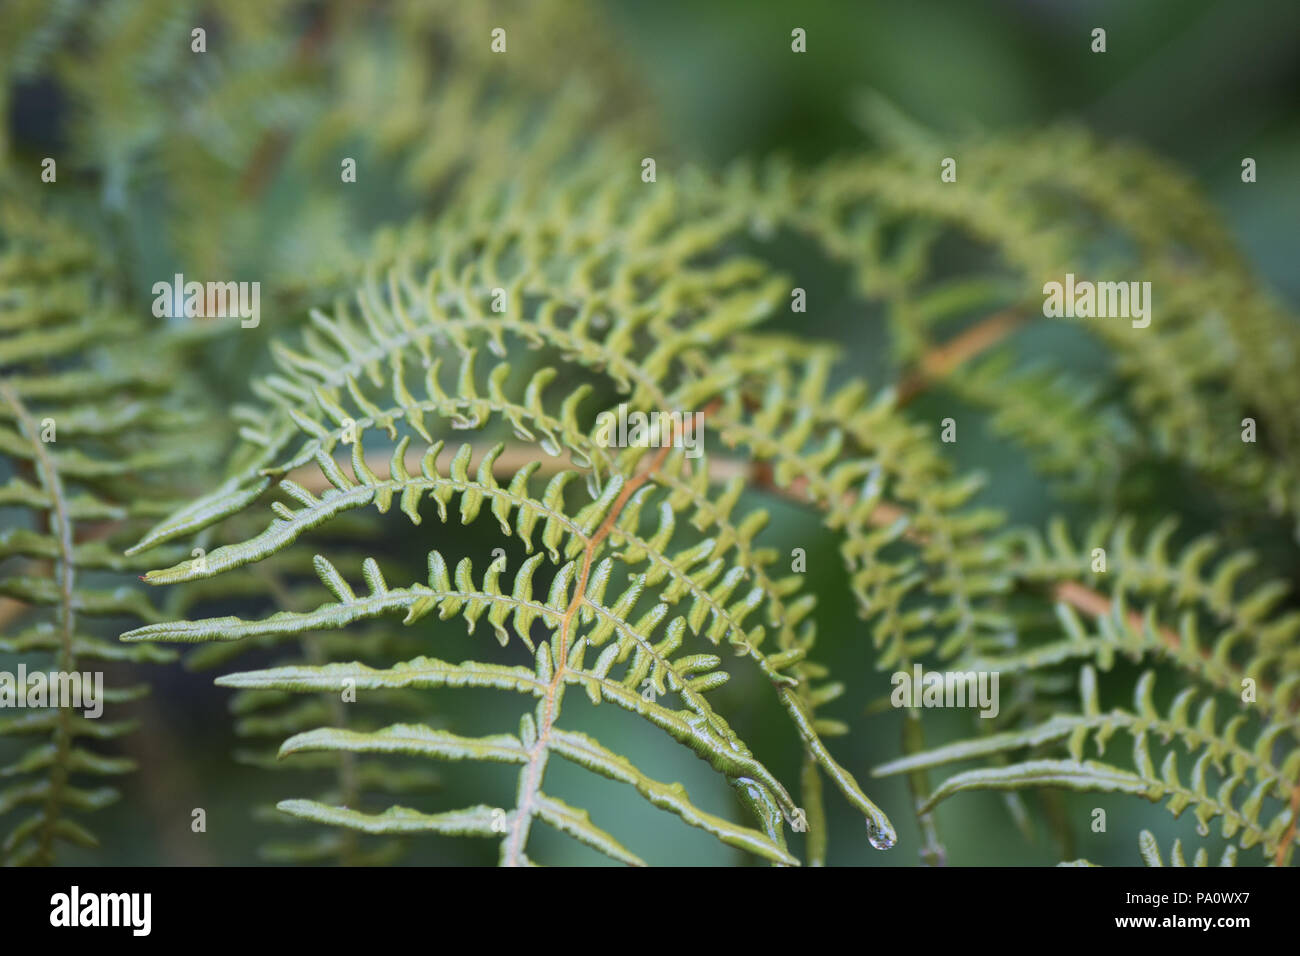 Fern fronds on natural background Stock Photo